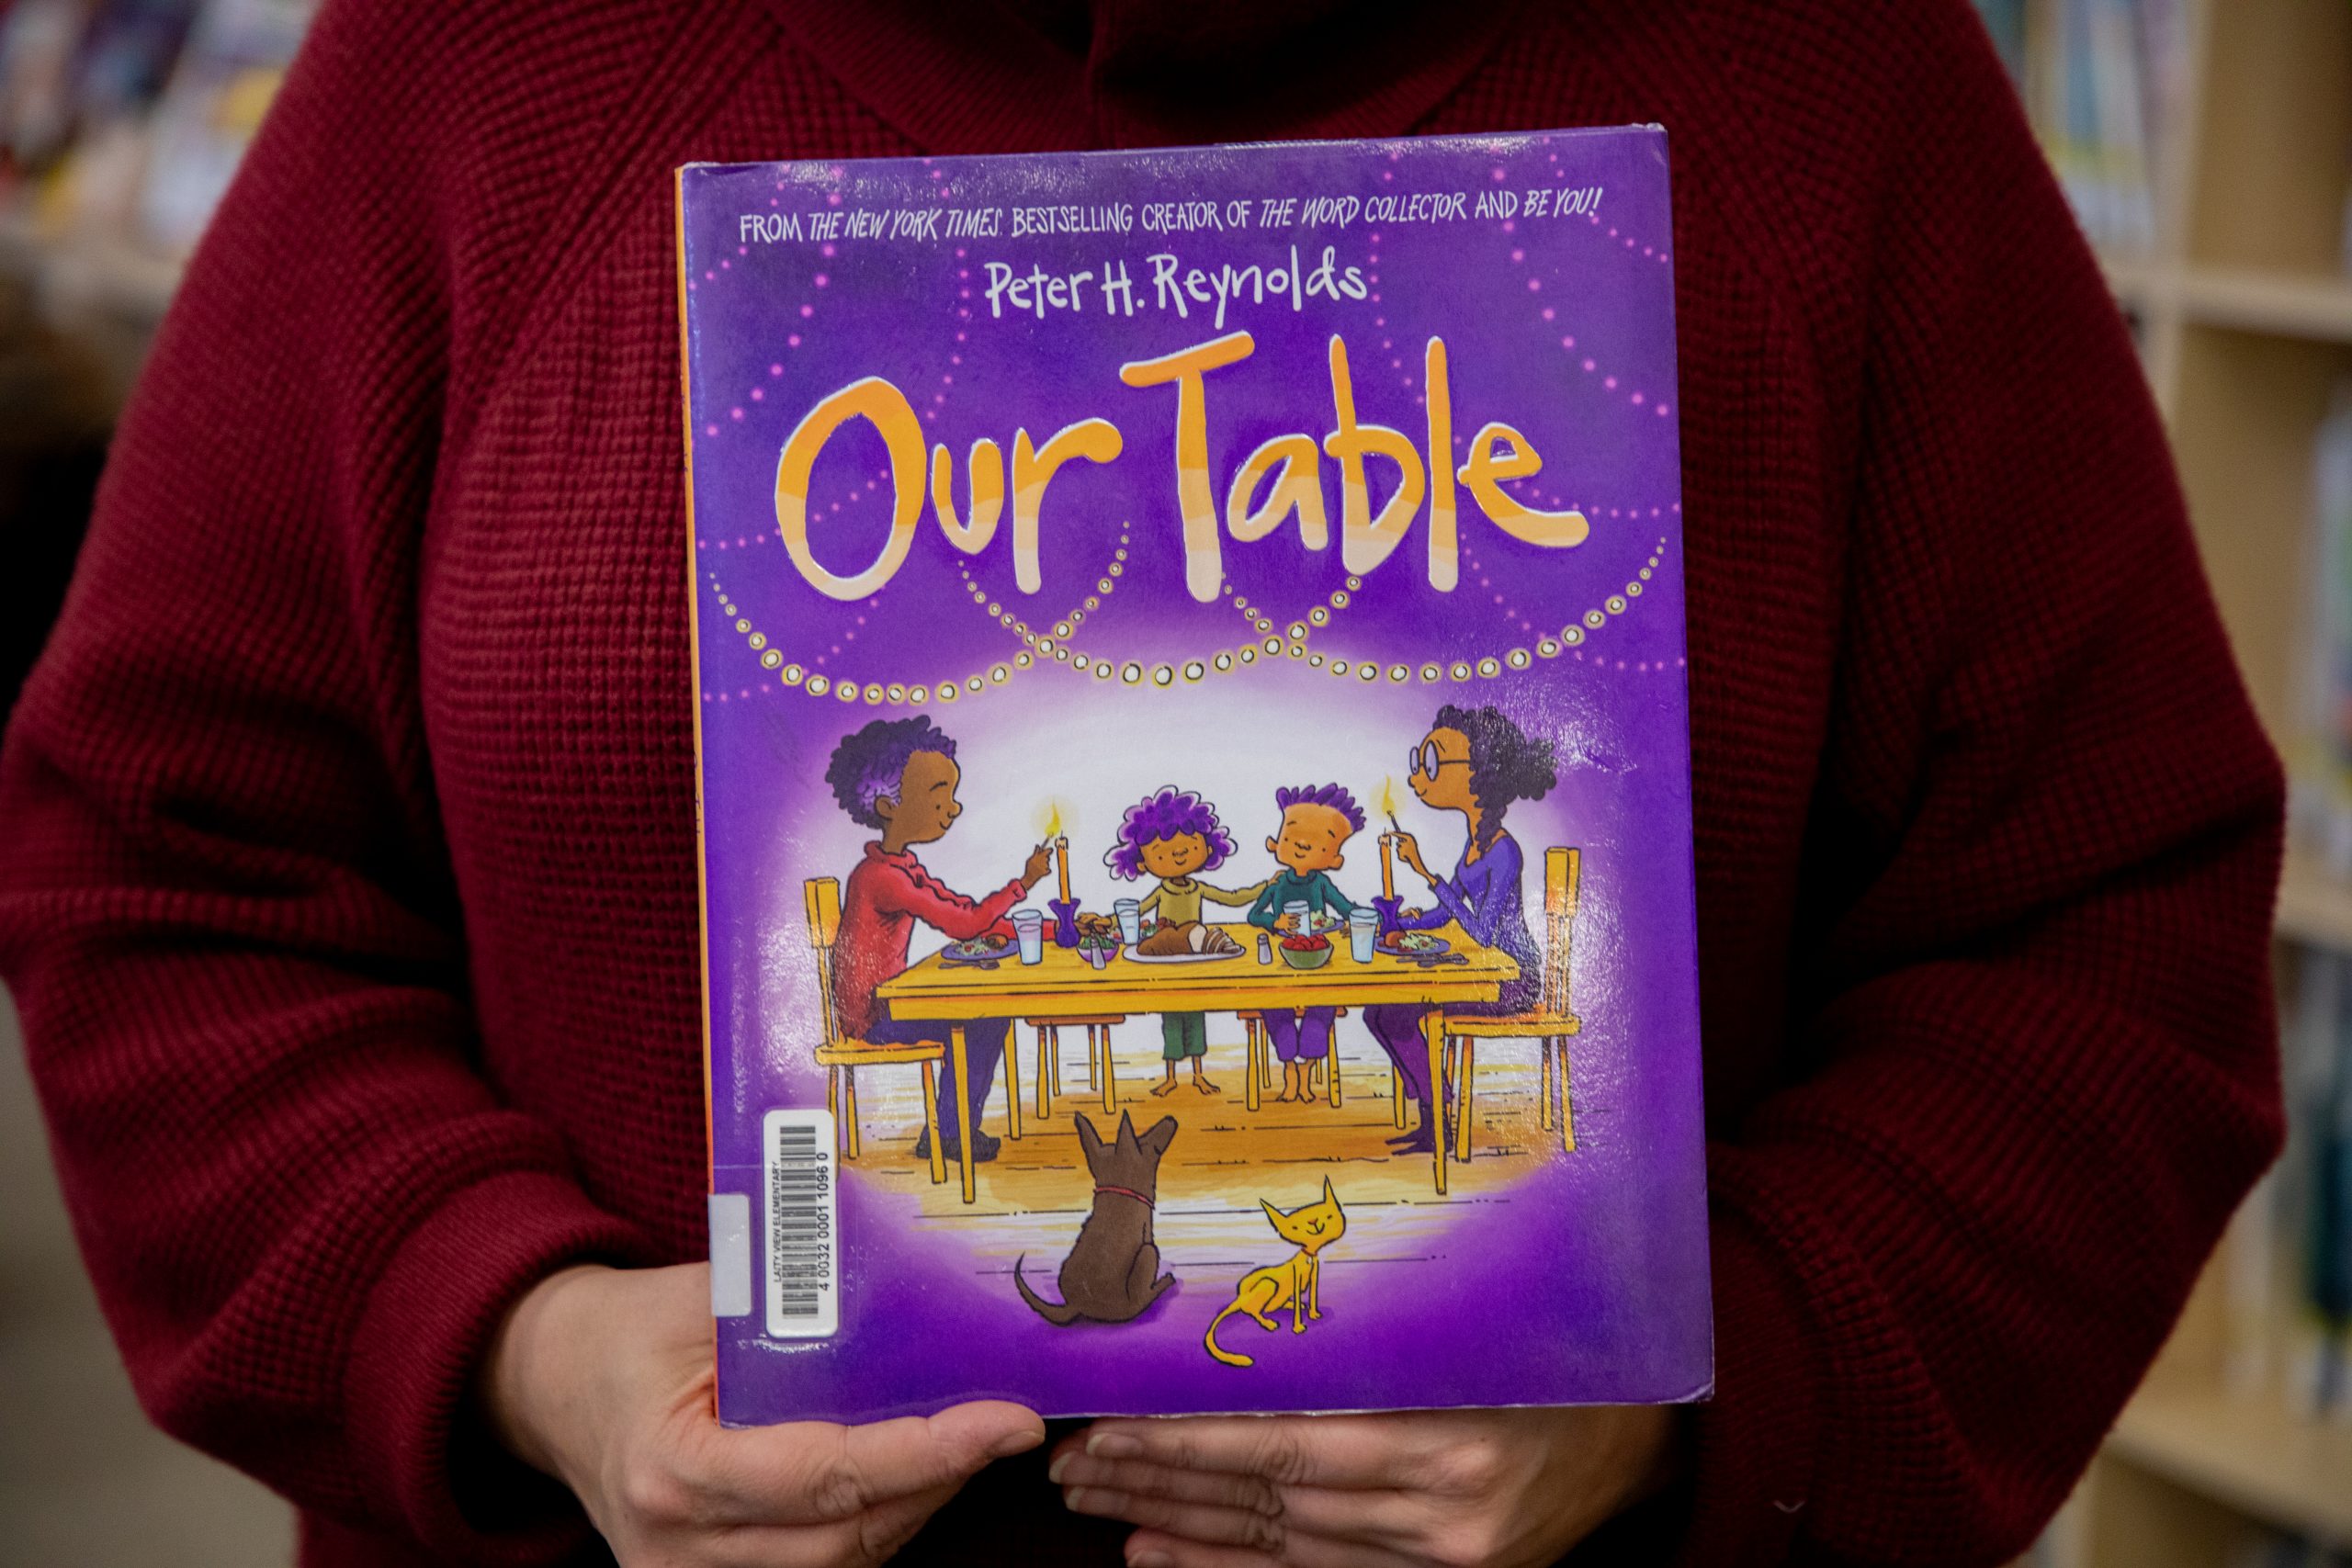 The cover of the book, "Our Table," by Peter H. Reynolds.